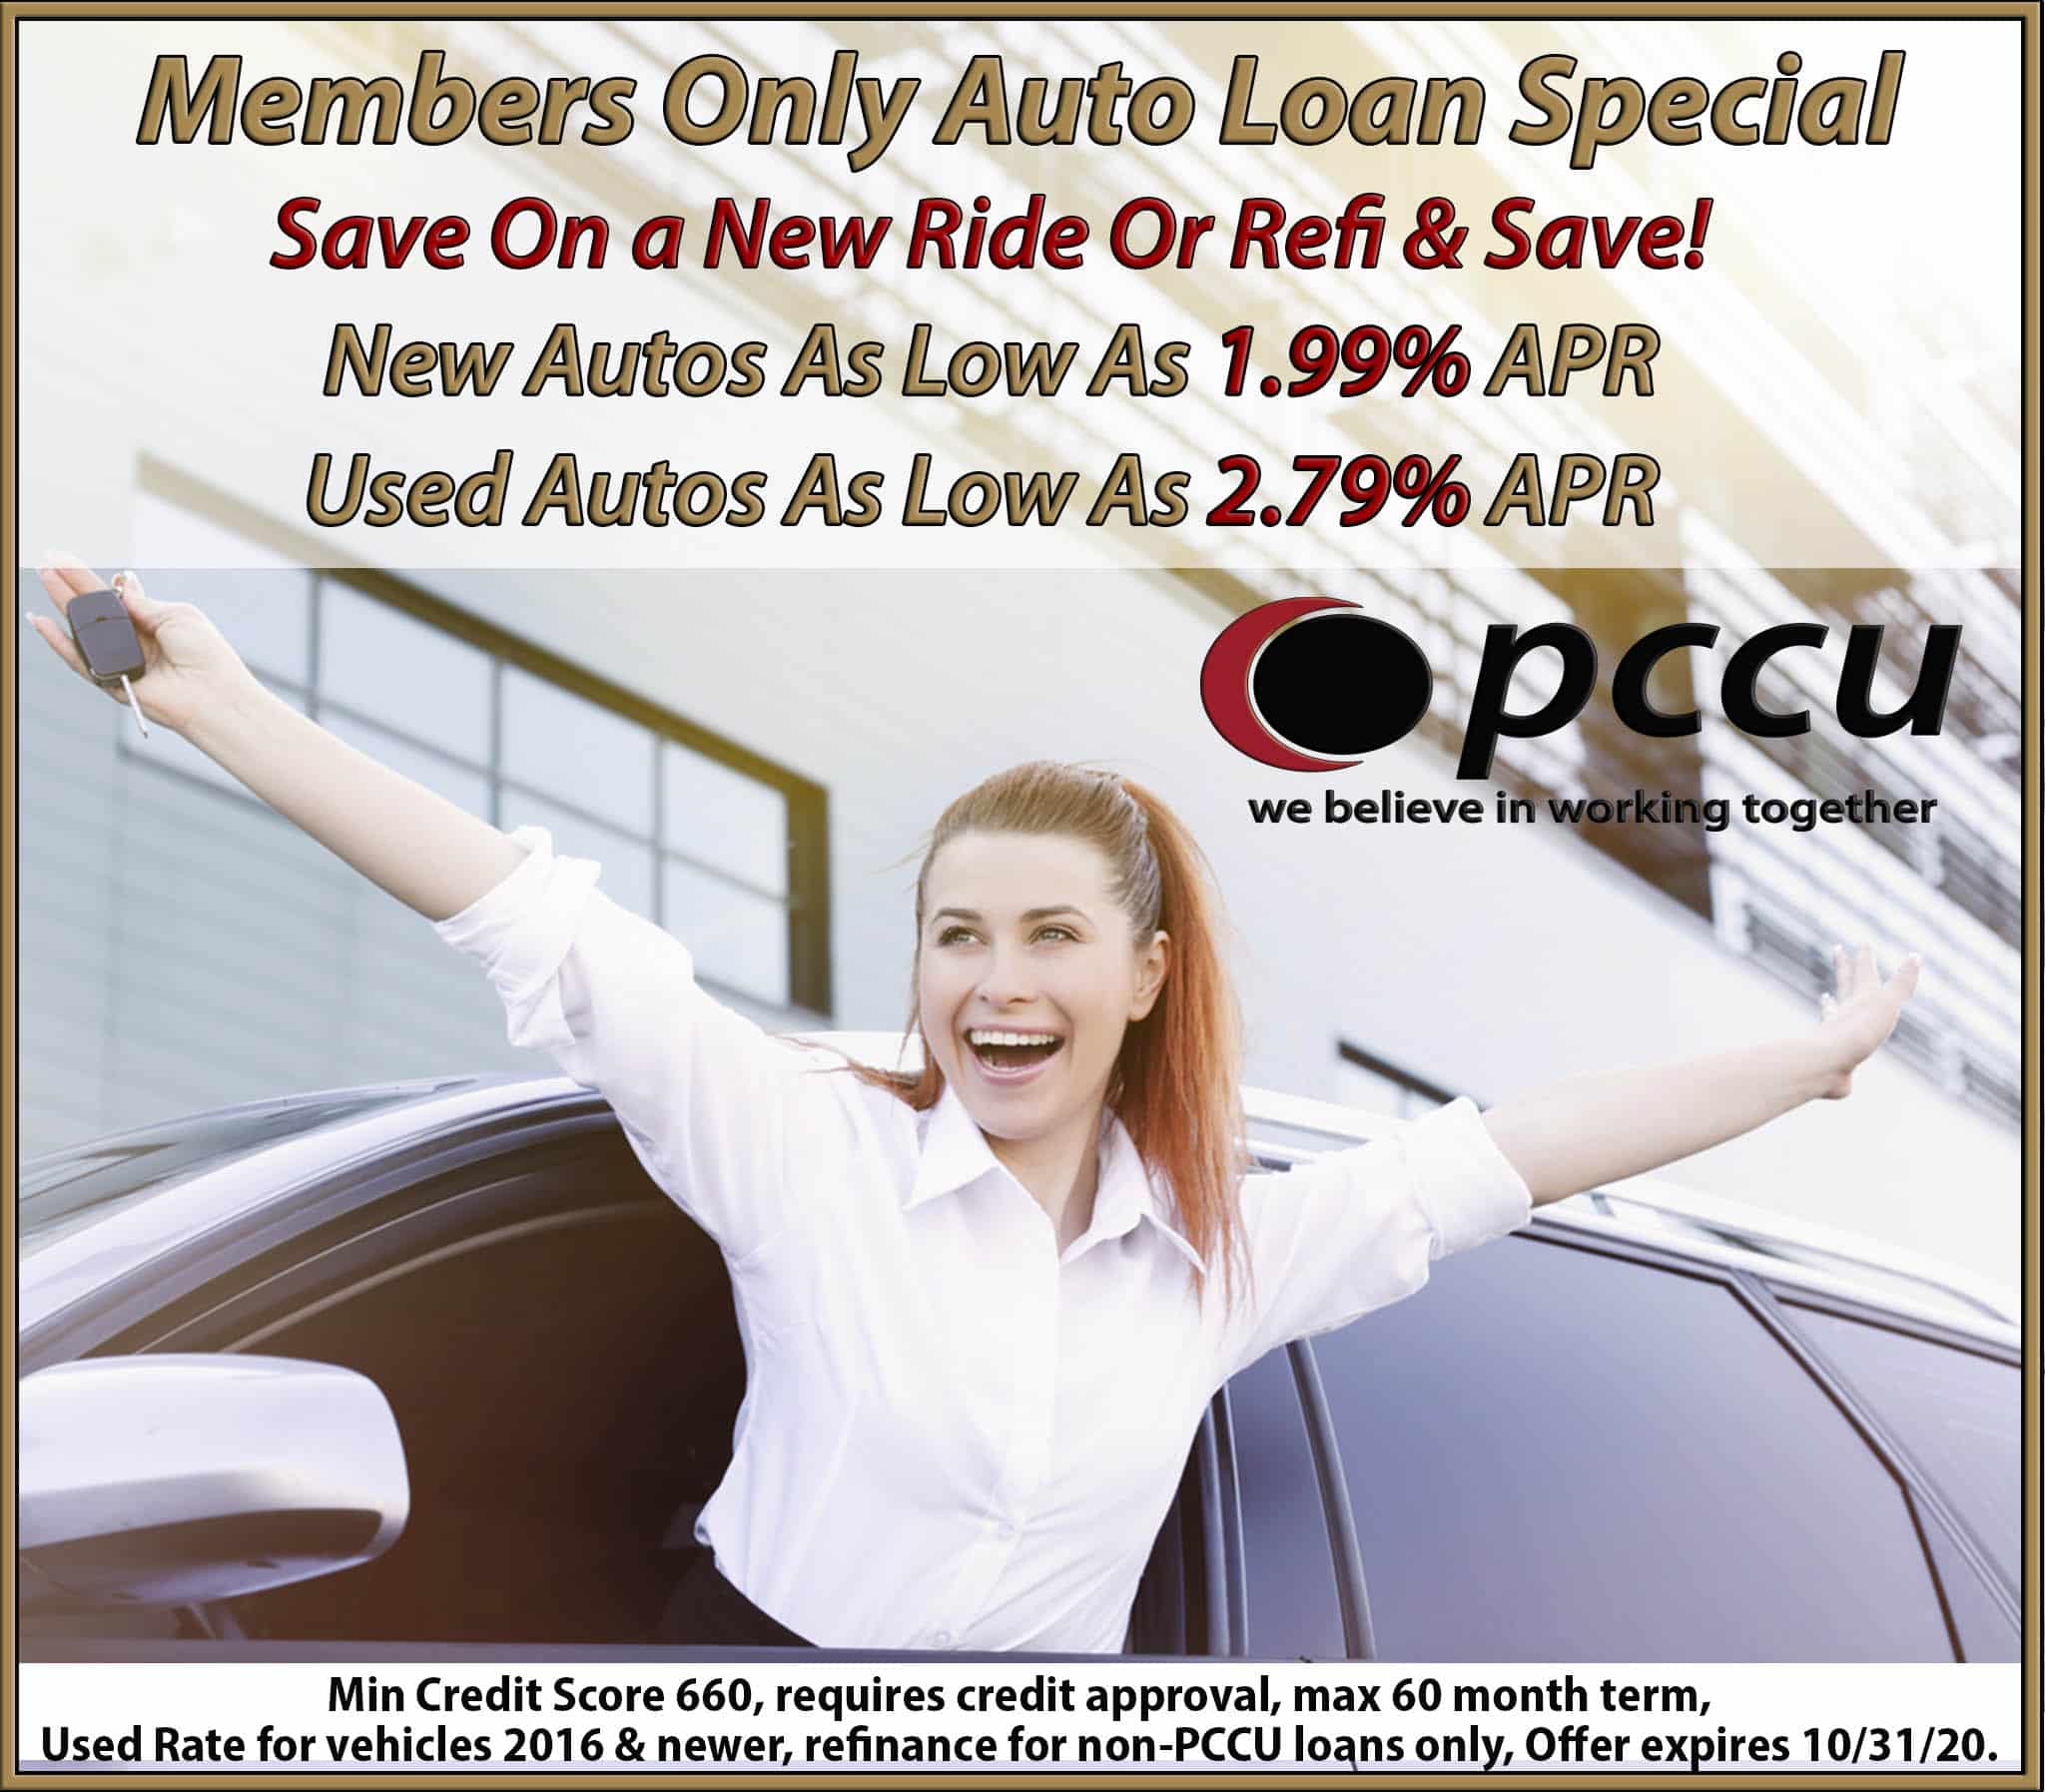 Members Only Auto Loan Special